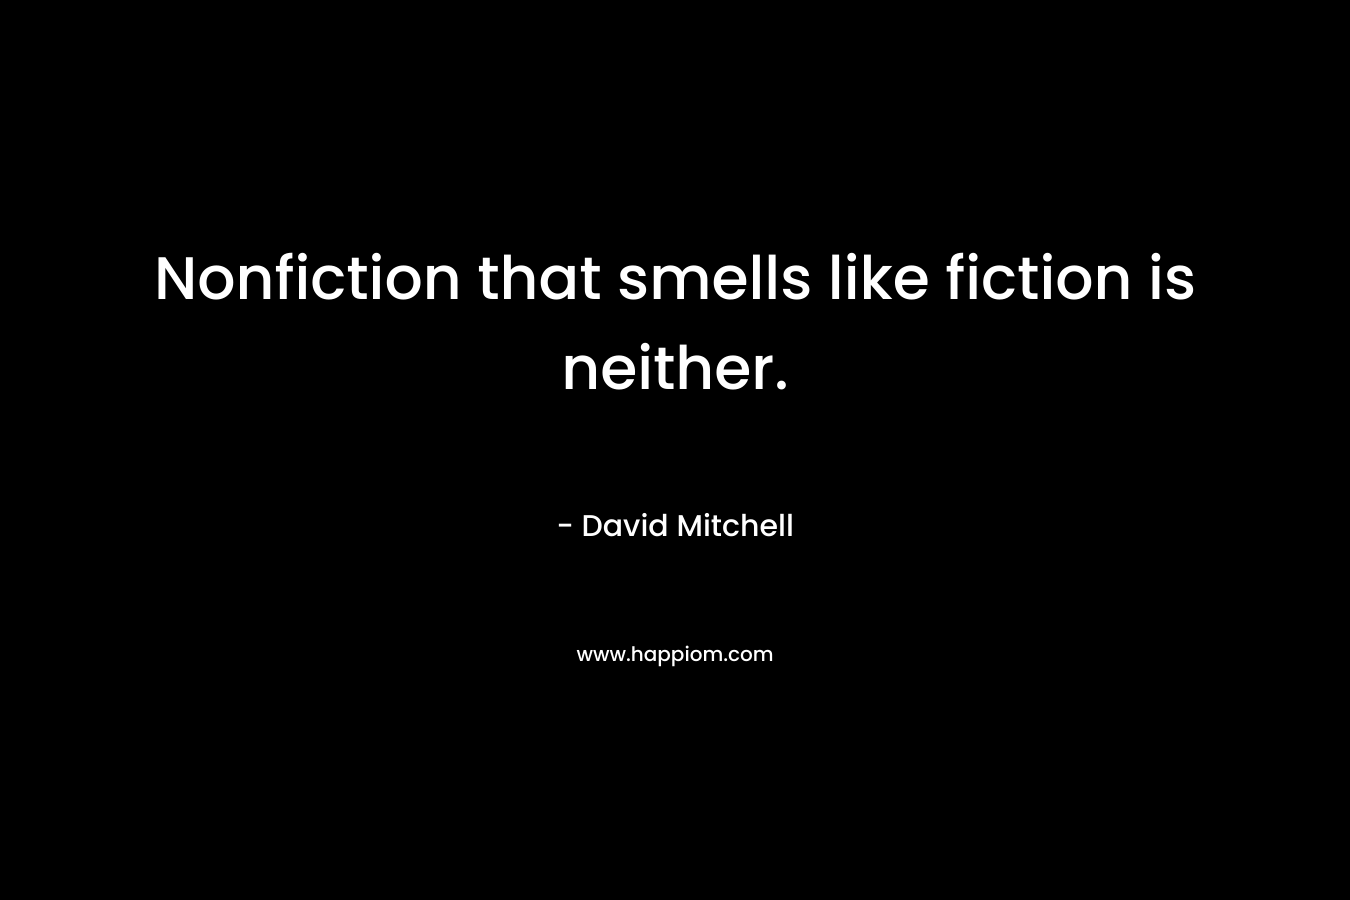 Nonfiction that smells like fiction is neither. – David Mitchell